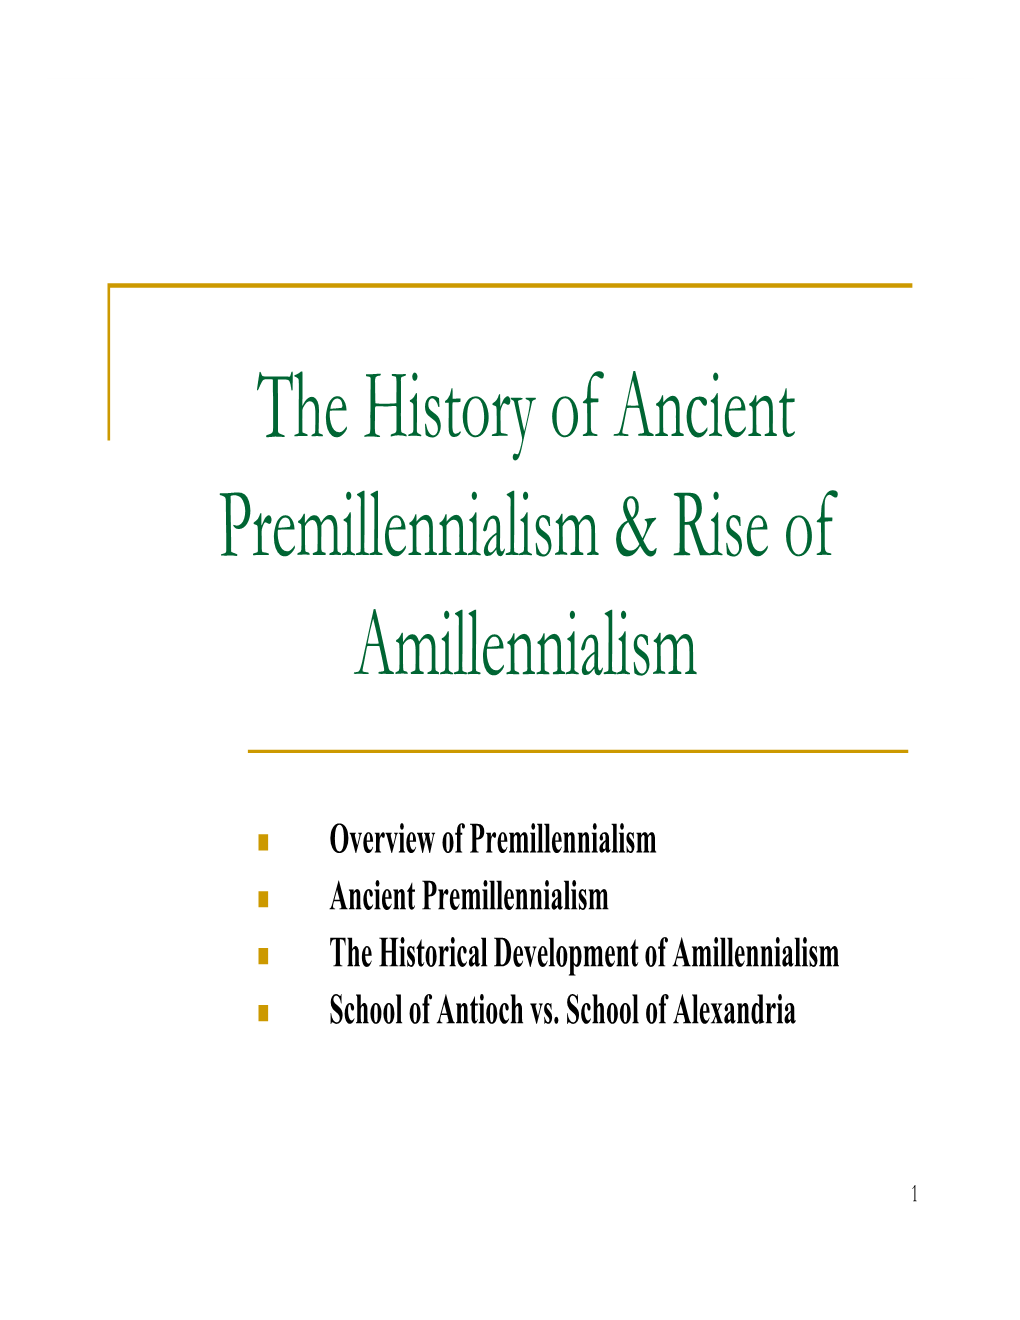 The History of Premillennialism